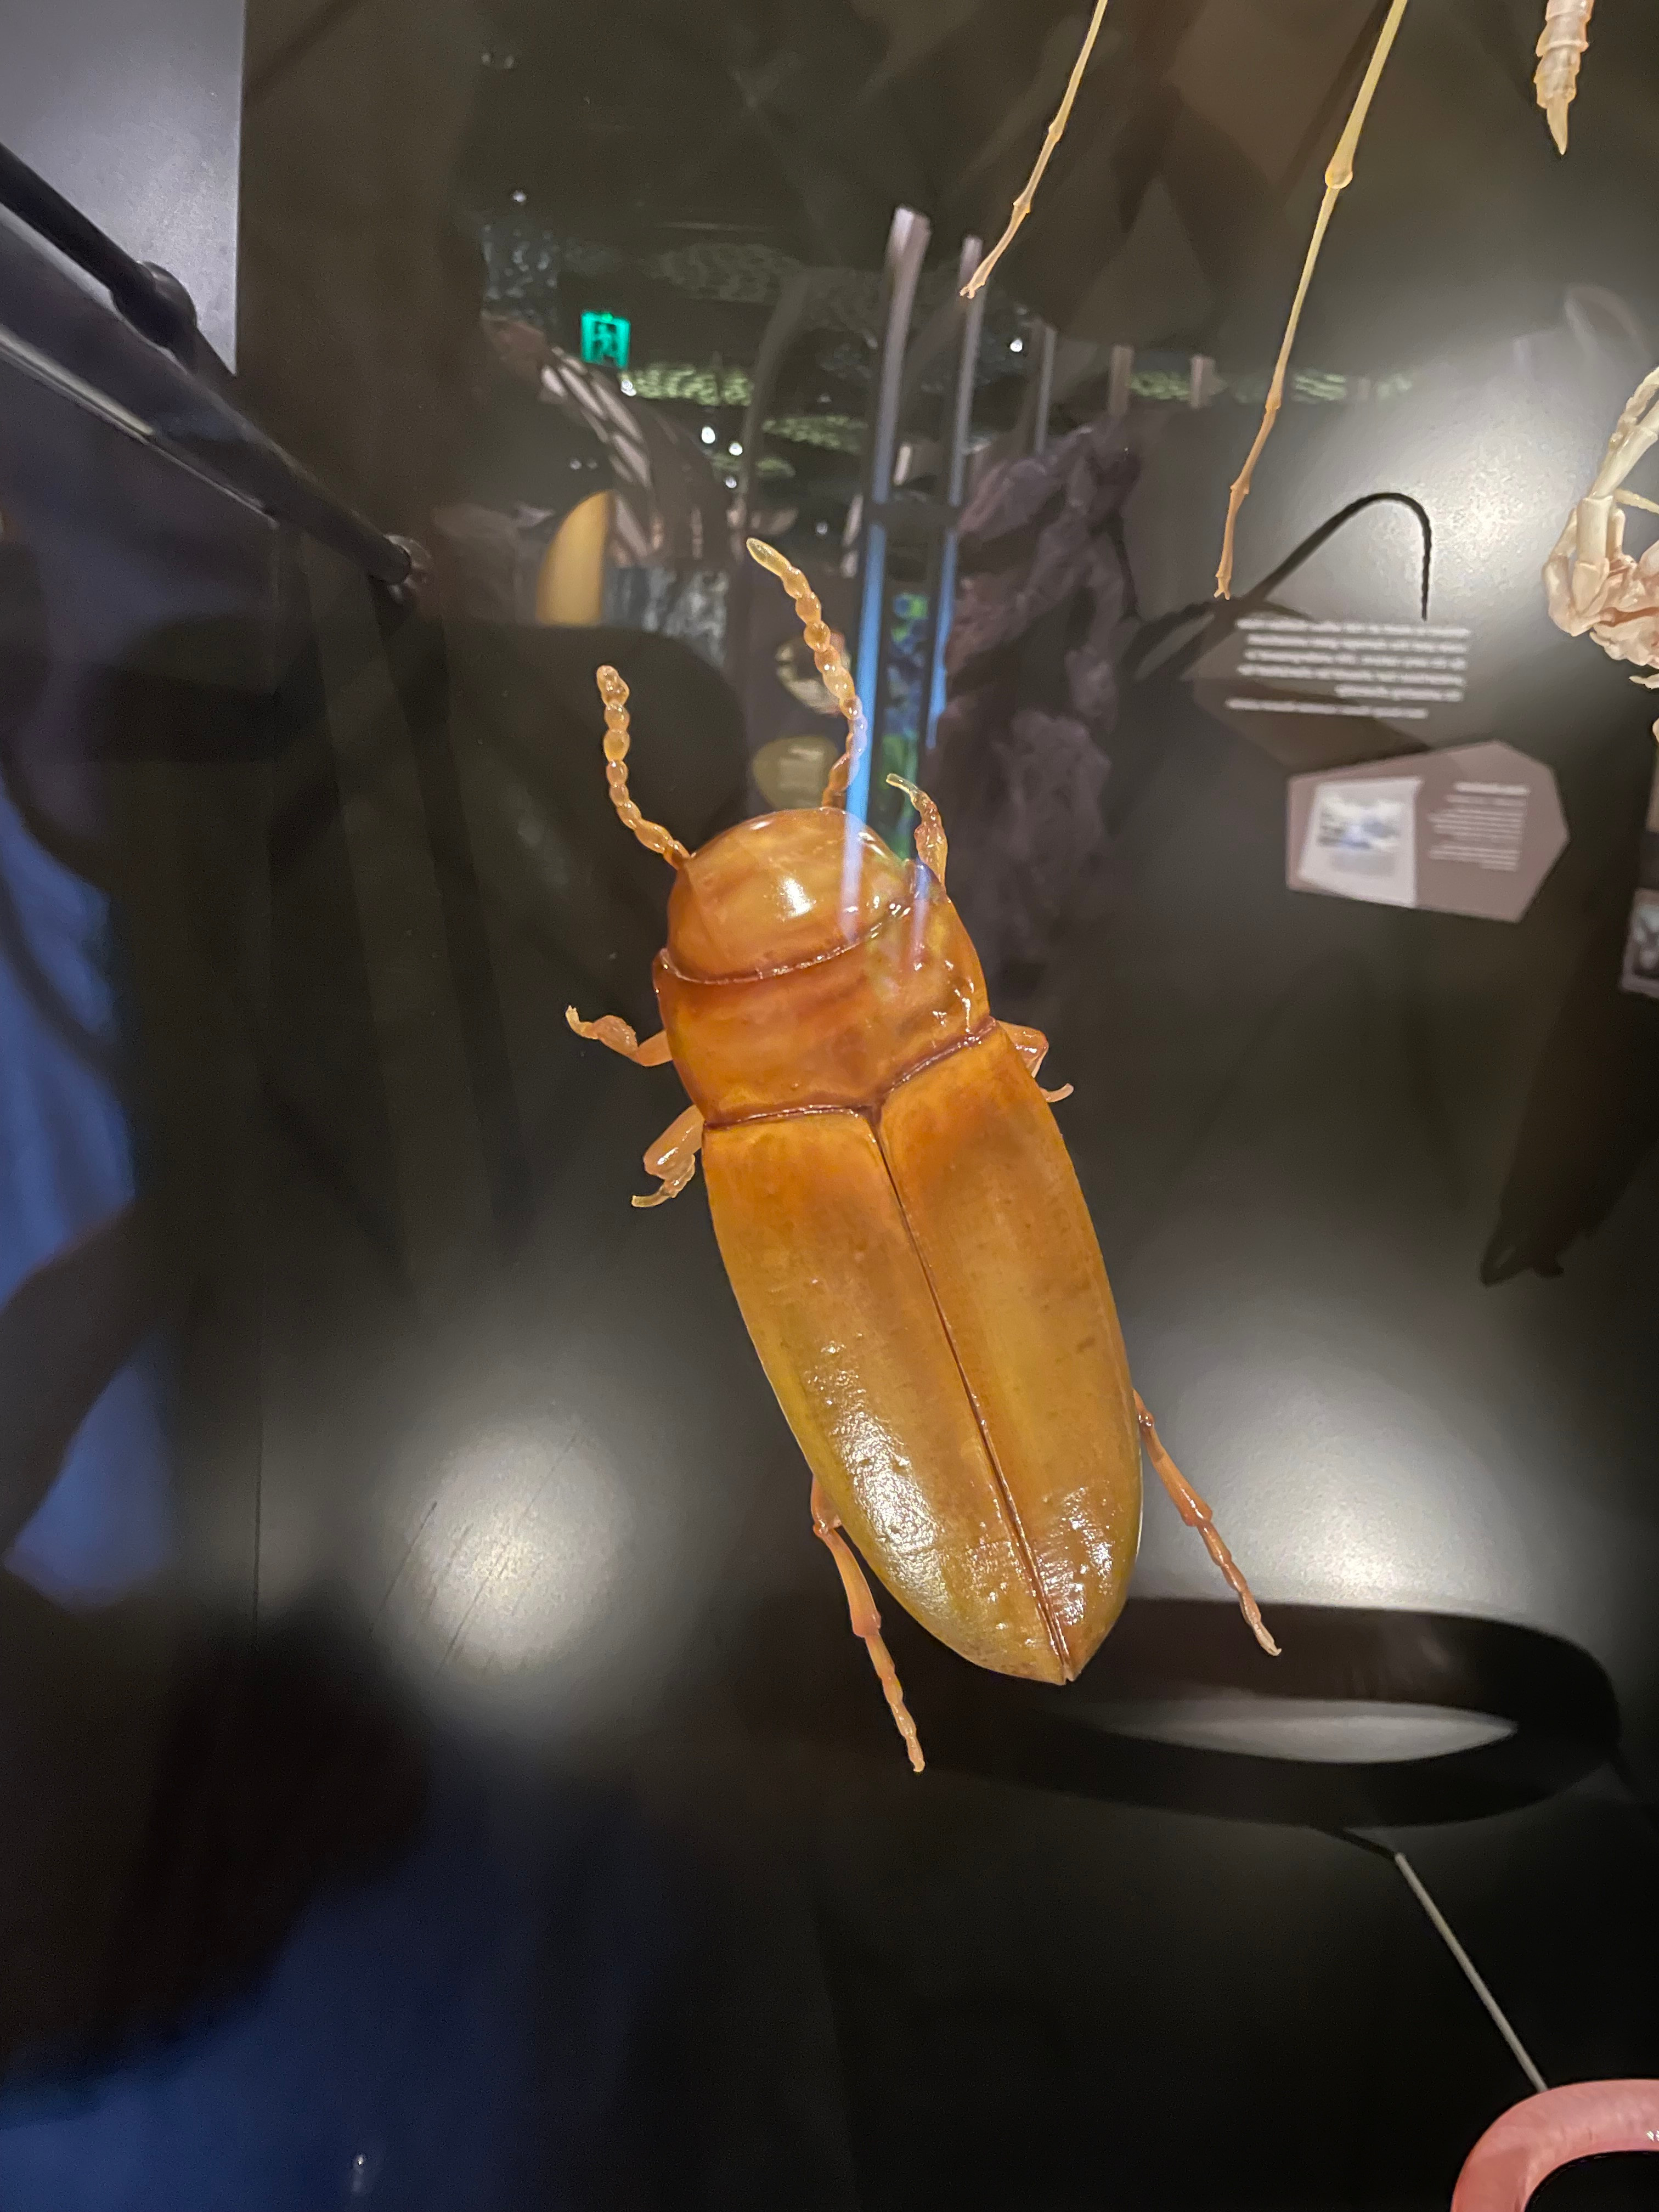 Photo of the 3D Printed model on display at the WAMuseum in Australis